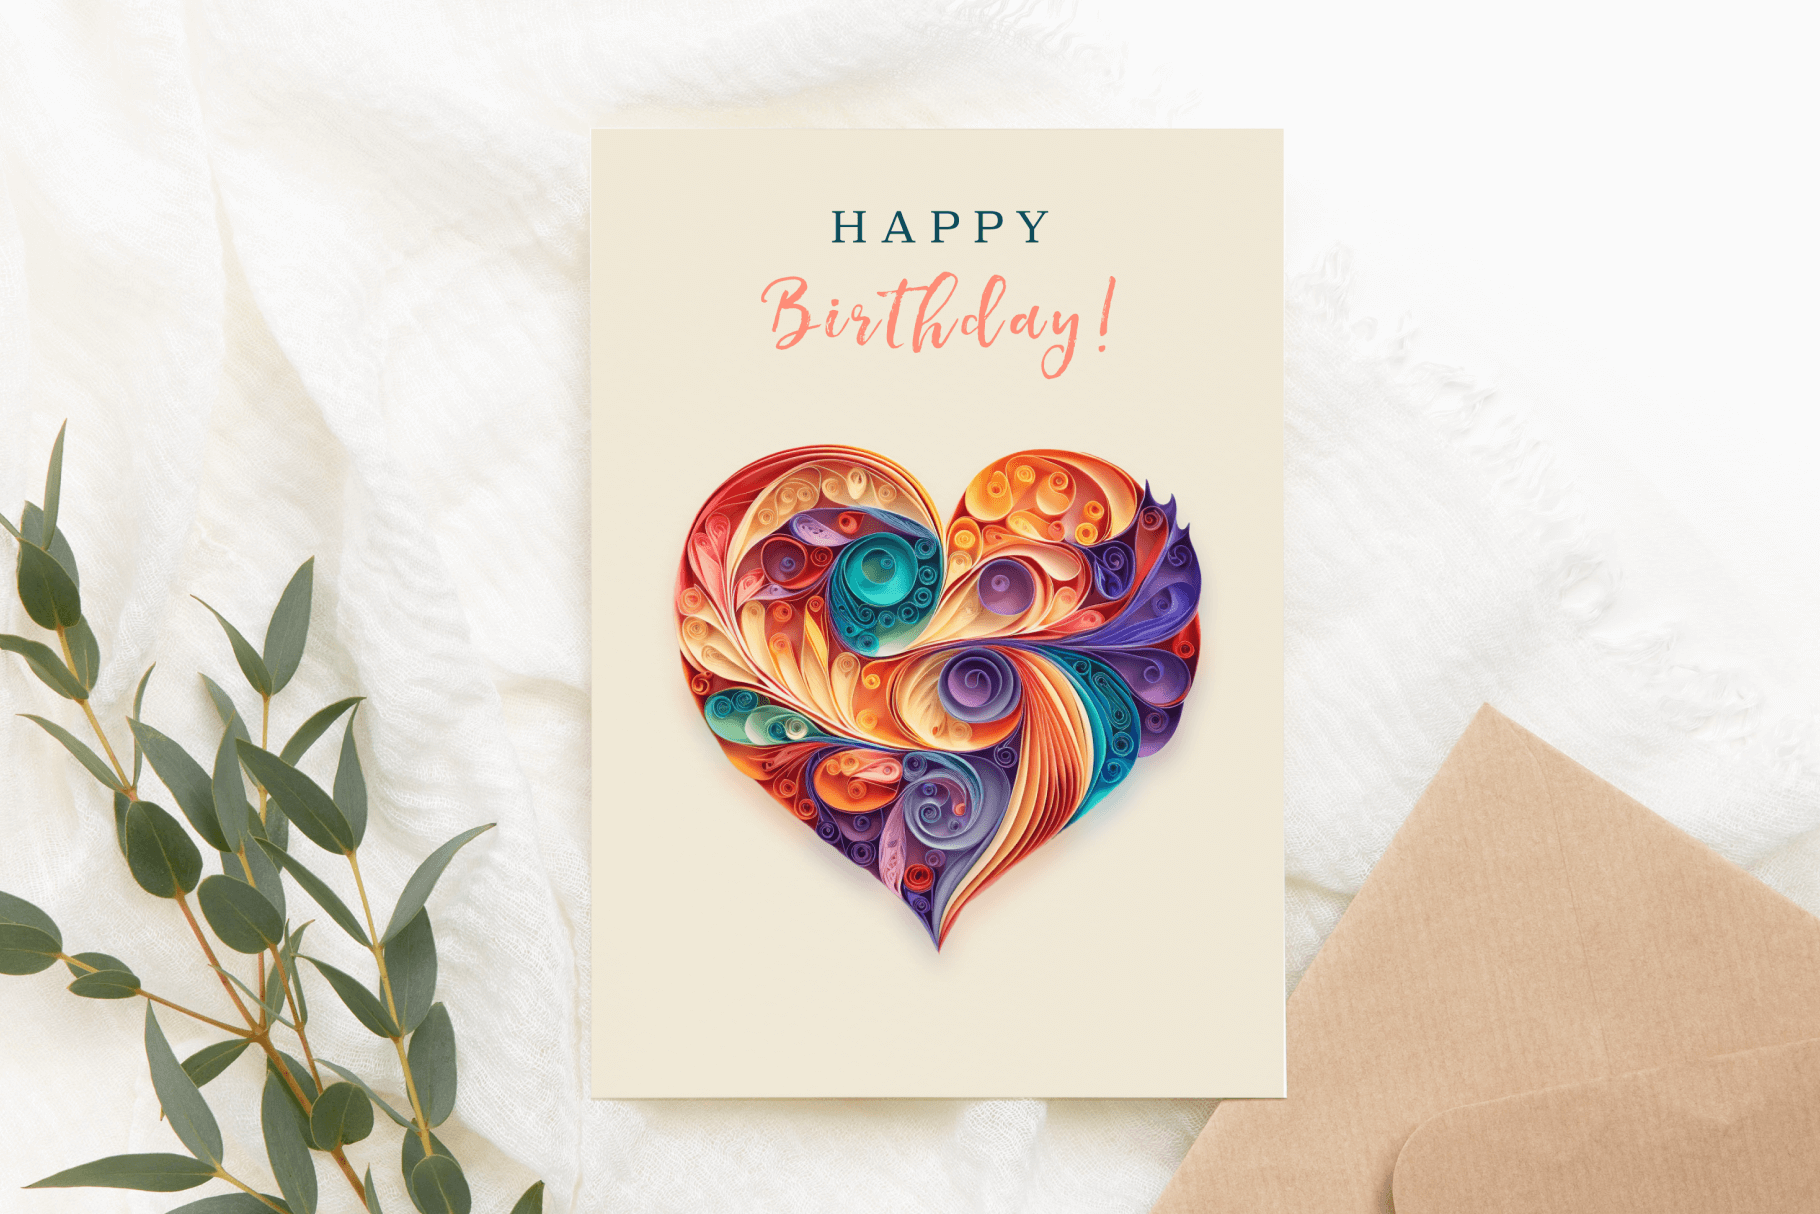 A birthday greeting card with a heart